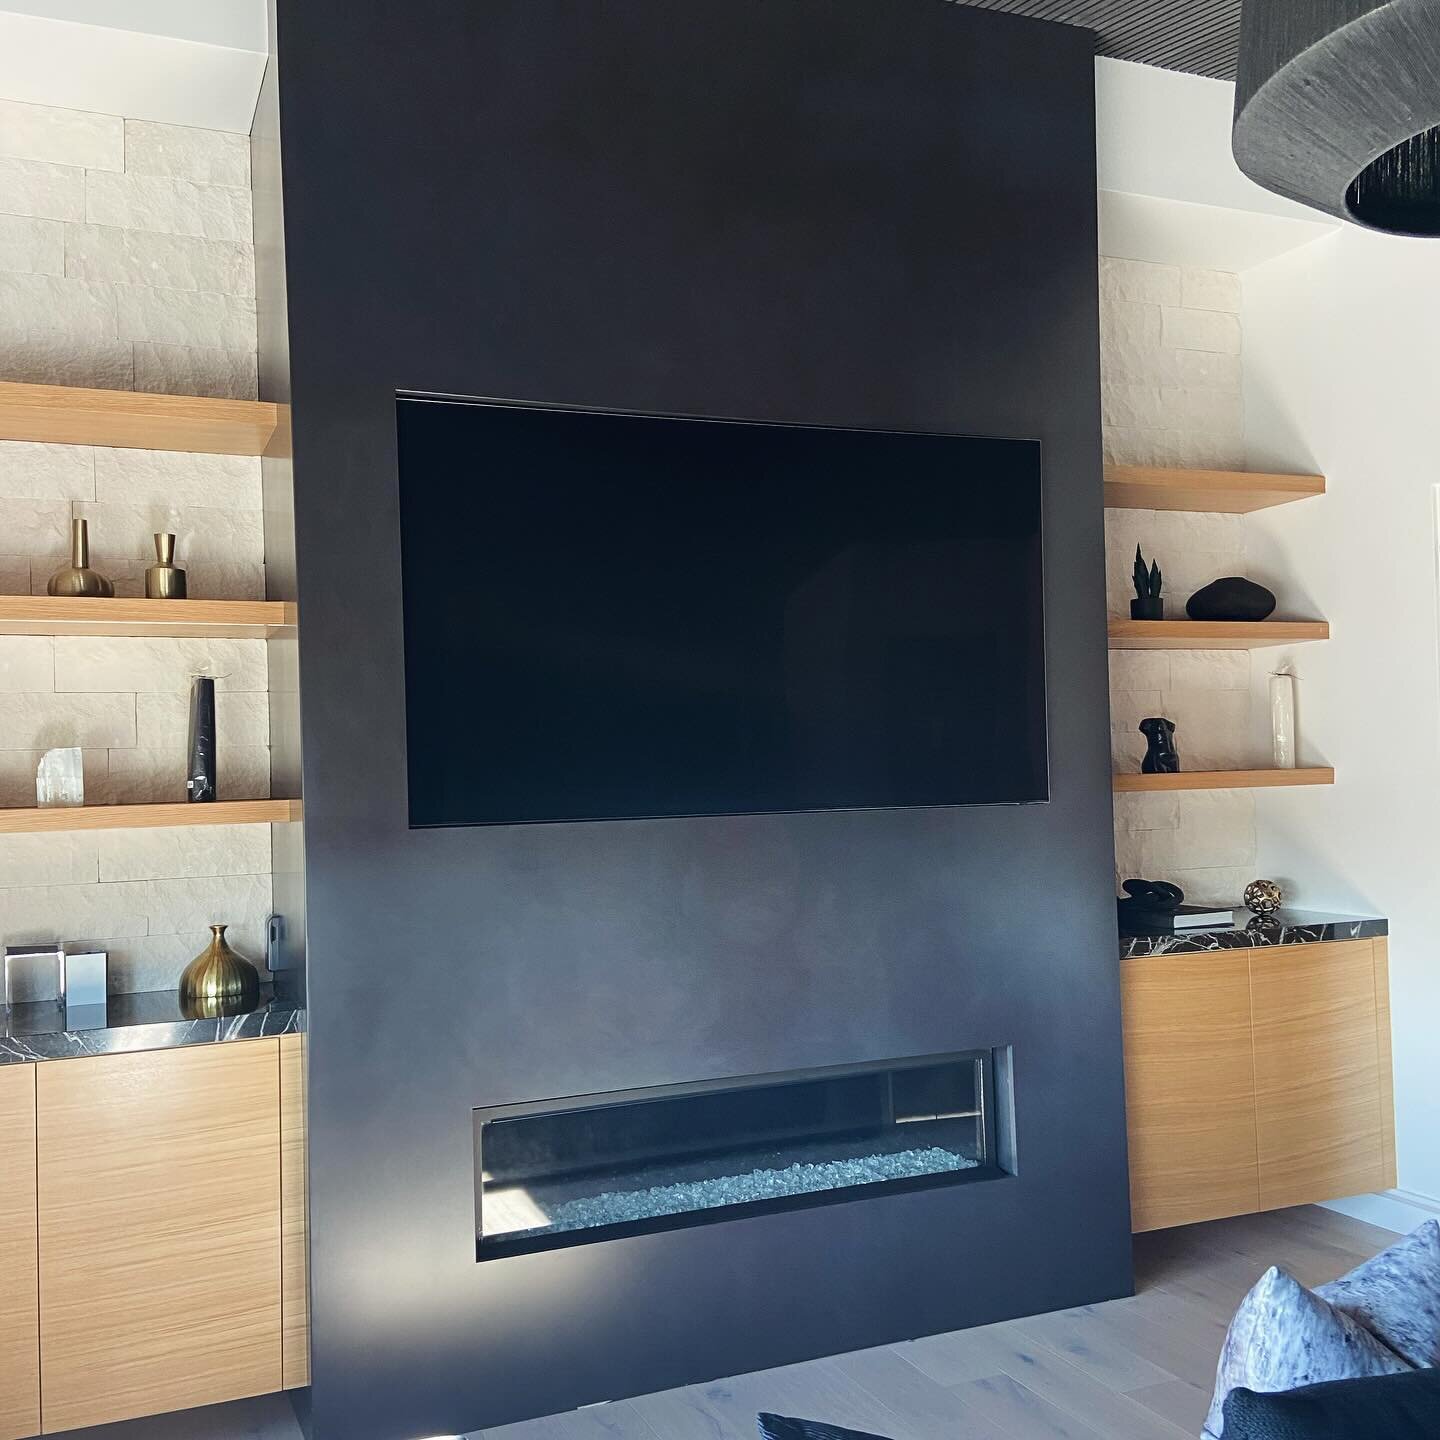 Master bedroom blackened steel fire place with a matte epoxy clear coat. 🤯

#steel #fireplace #blackened #modern #design #metalwork